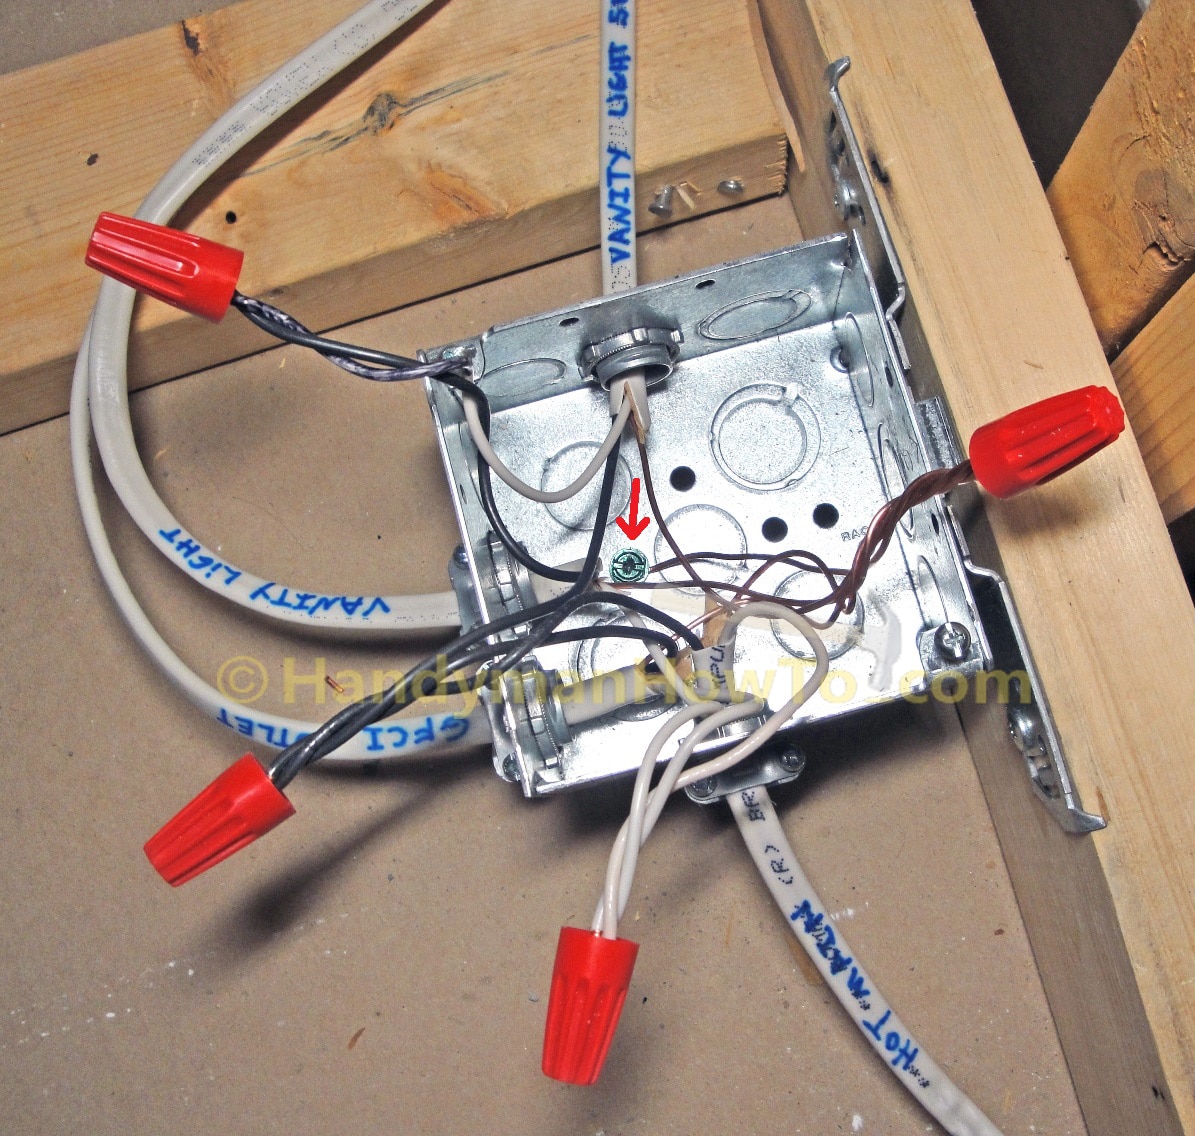 How to Finish a Basement Bathroom - Ceiling Junction Box  